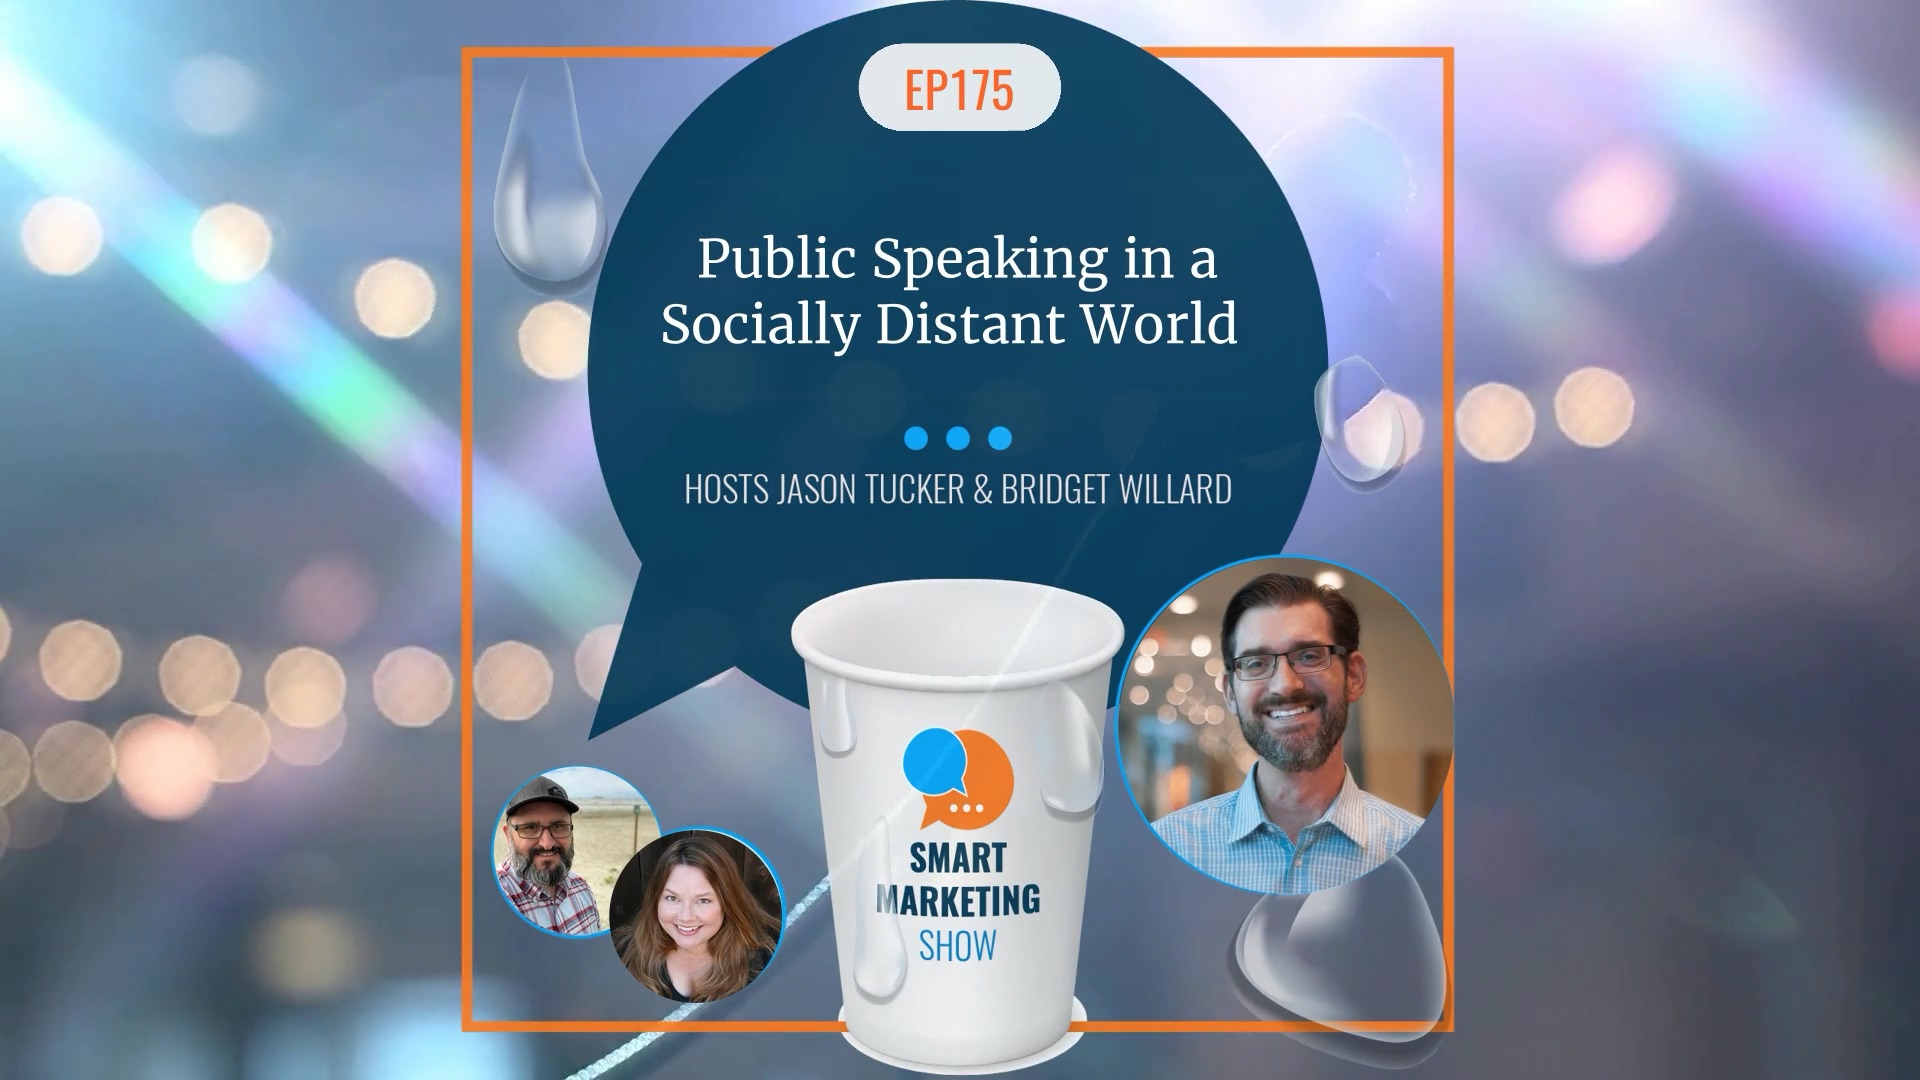 EP175 Public Speaking in a Socially Distant World